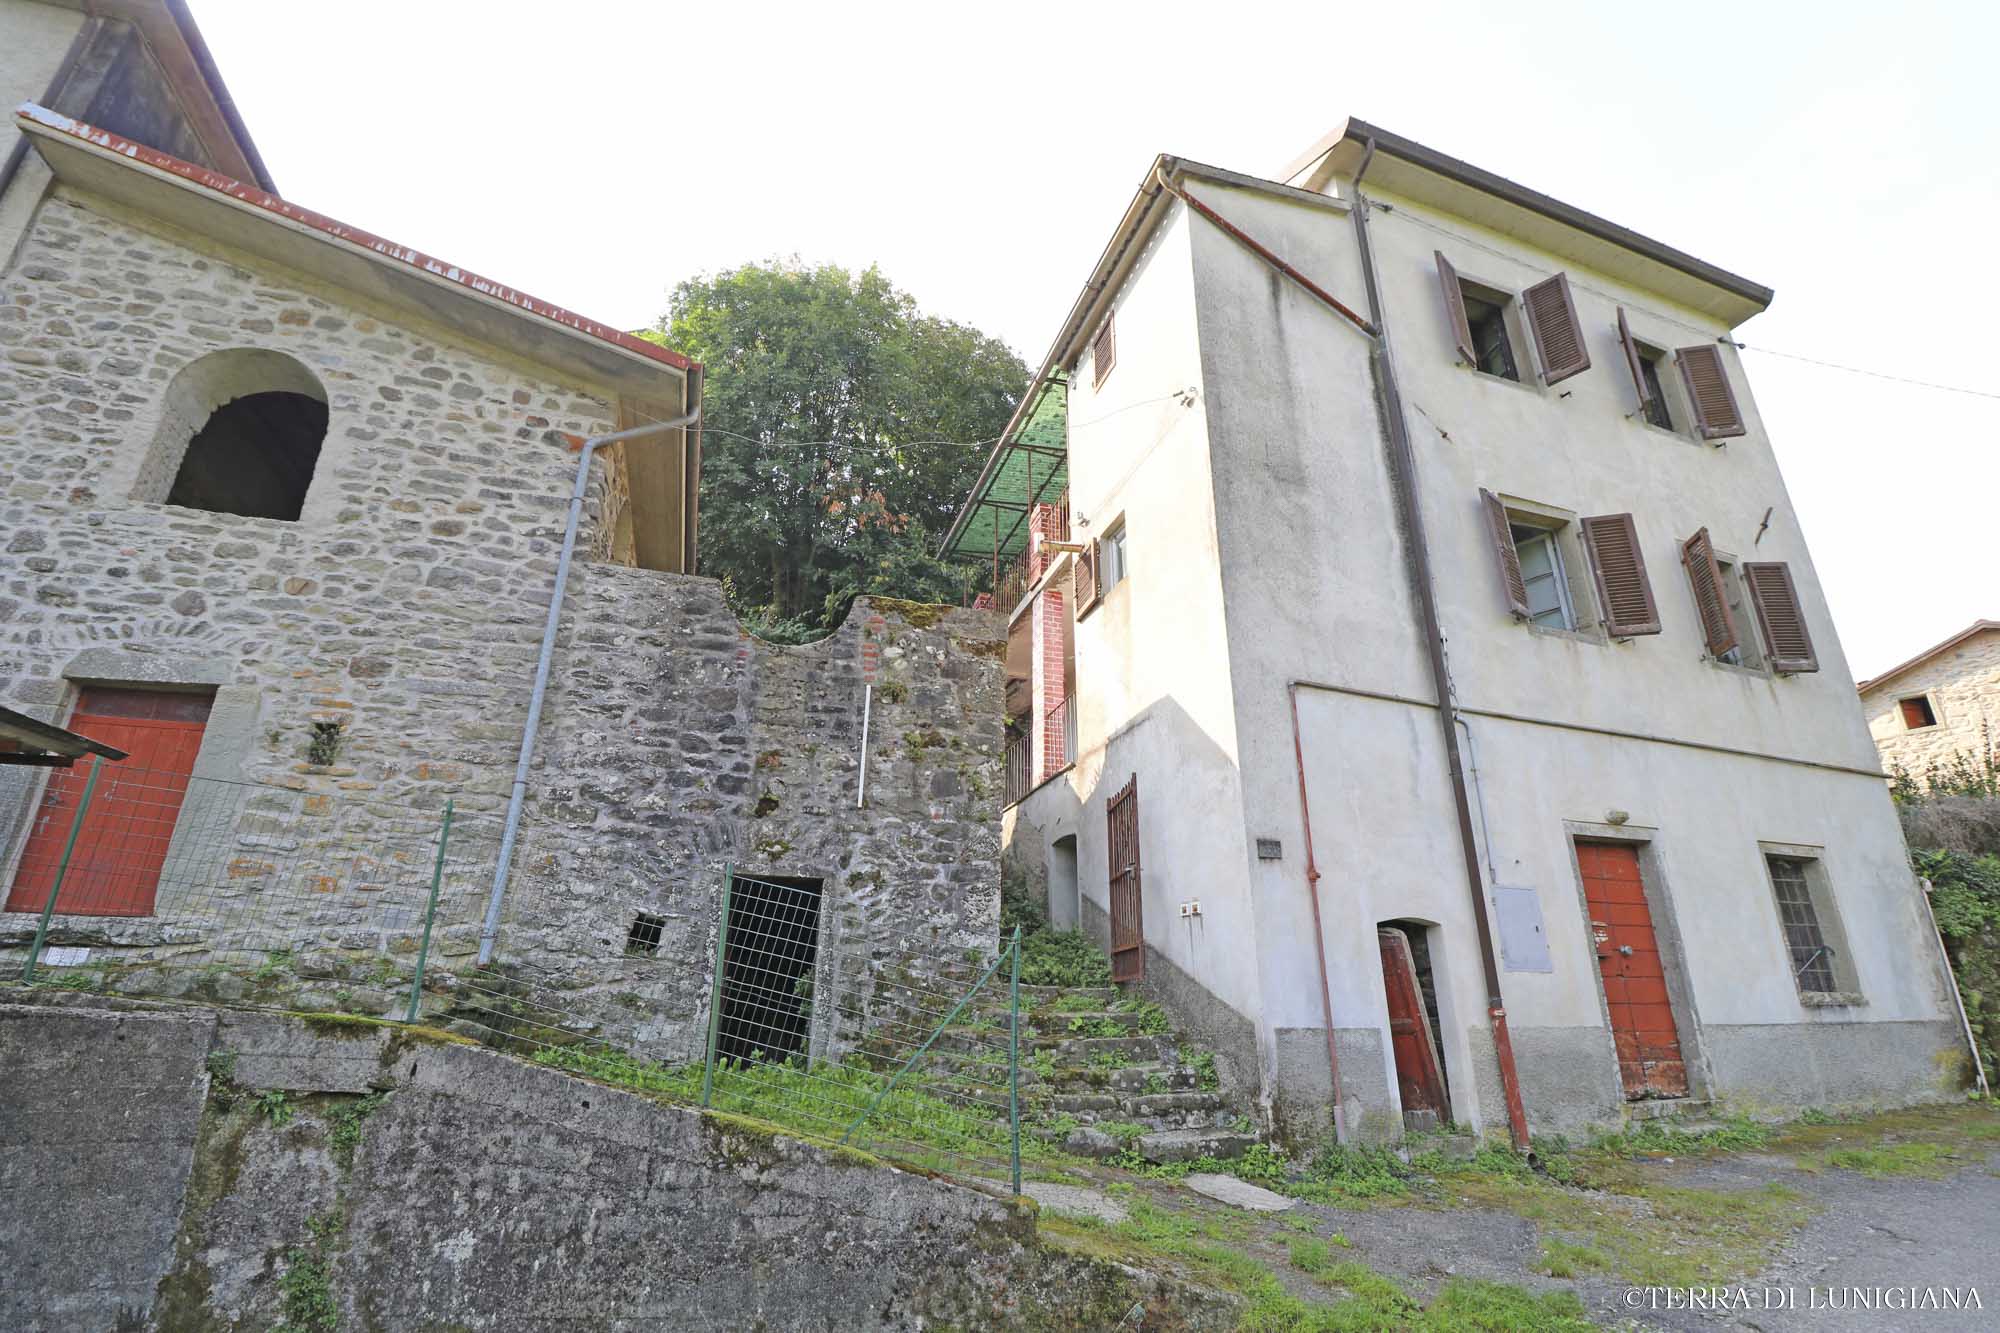 CASA ROSITA – Detached Stone House with Garden, Cottage, Garage just 2 minutes from the center of Pontremoli